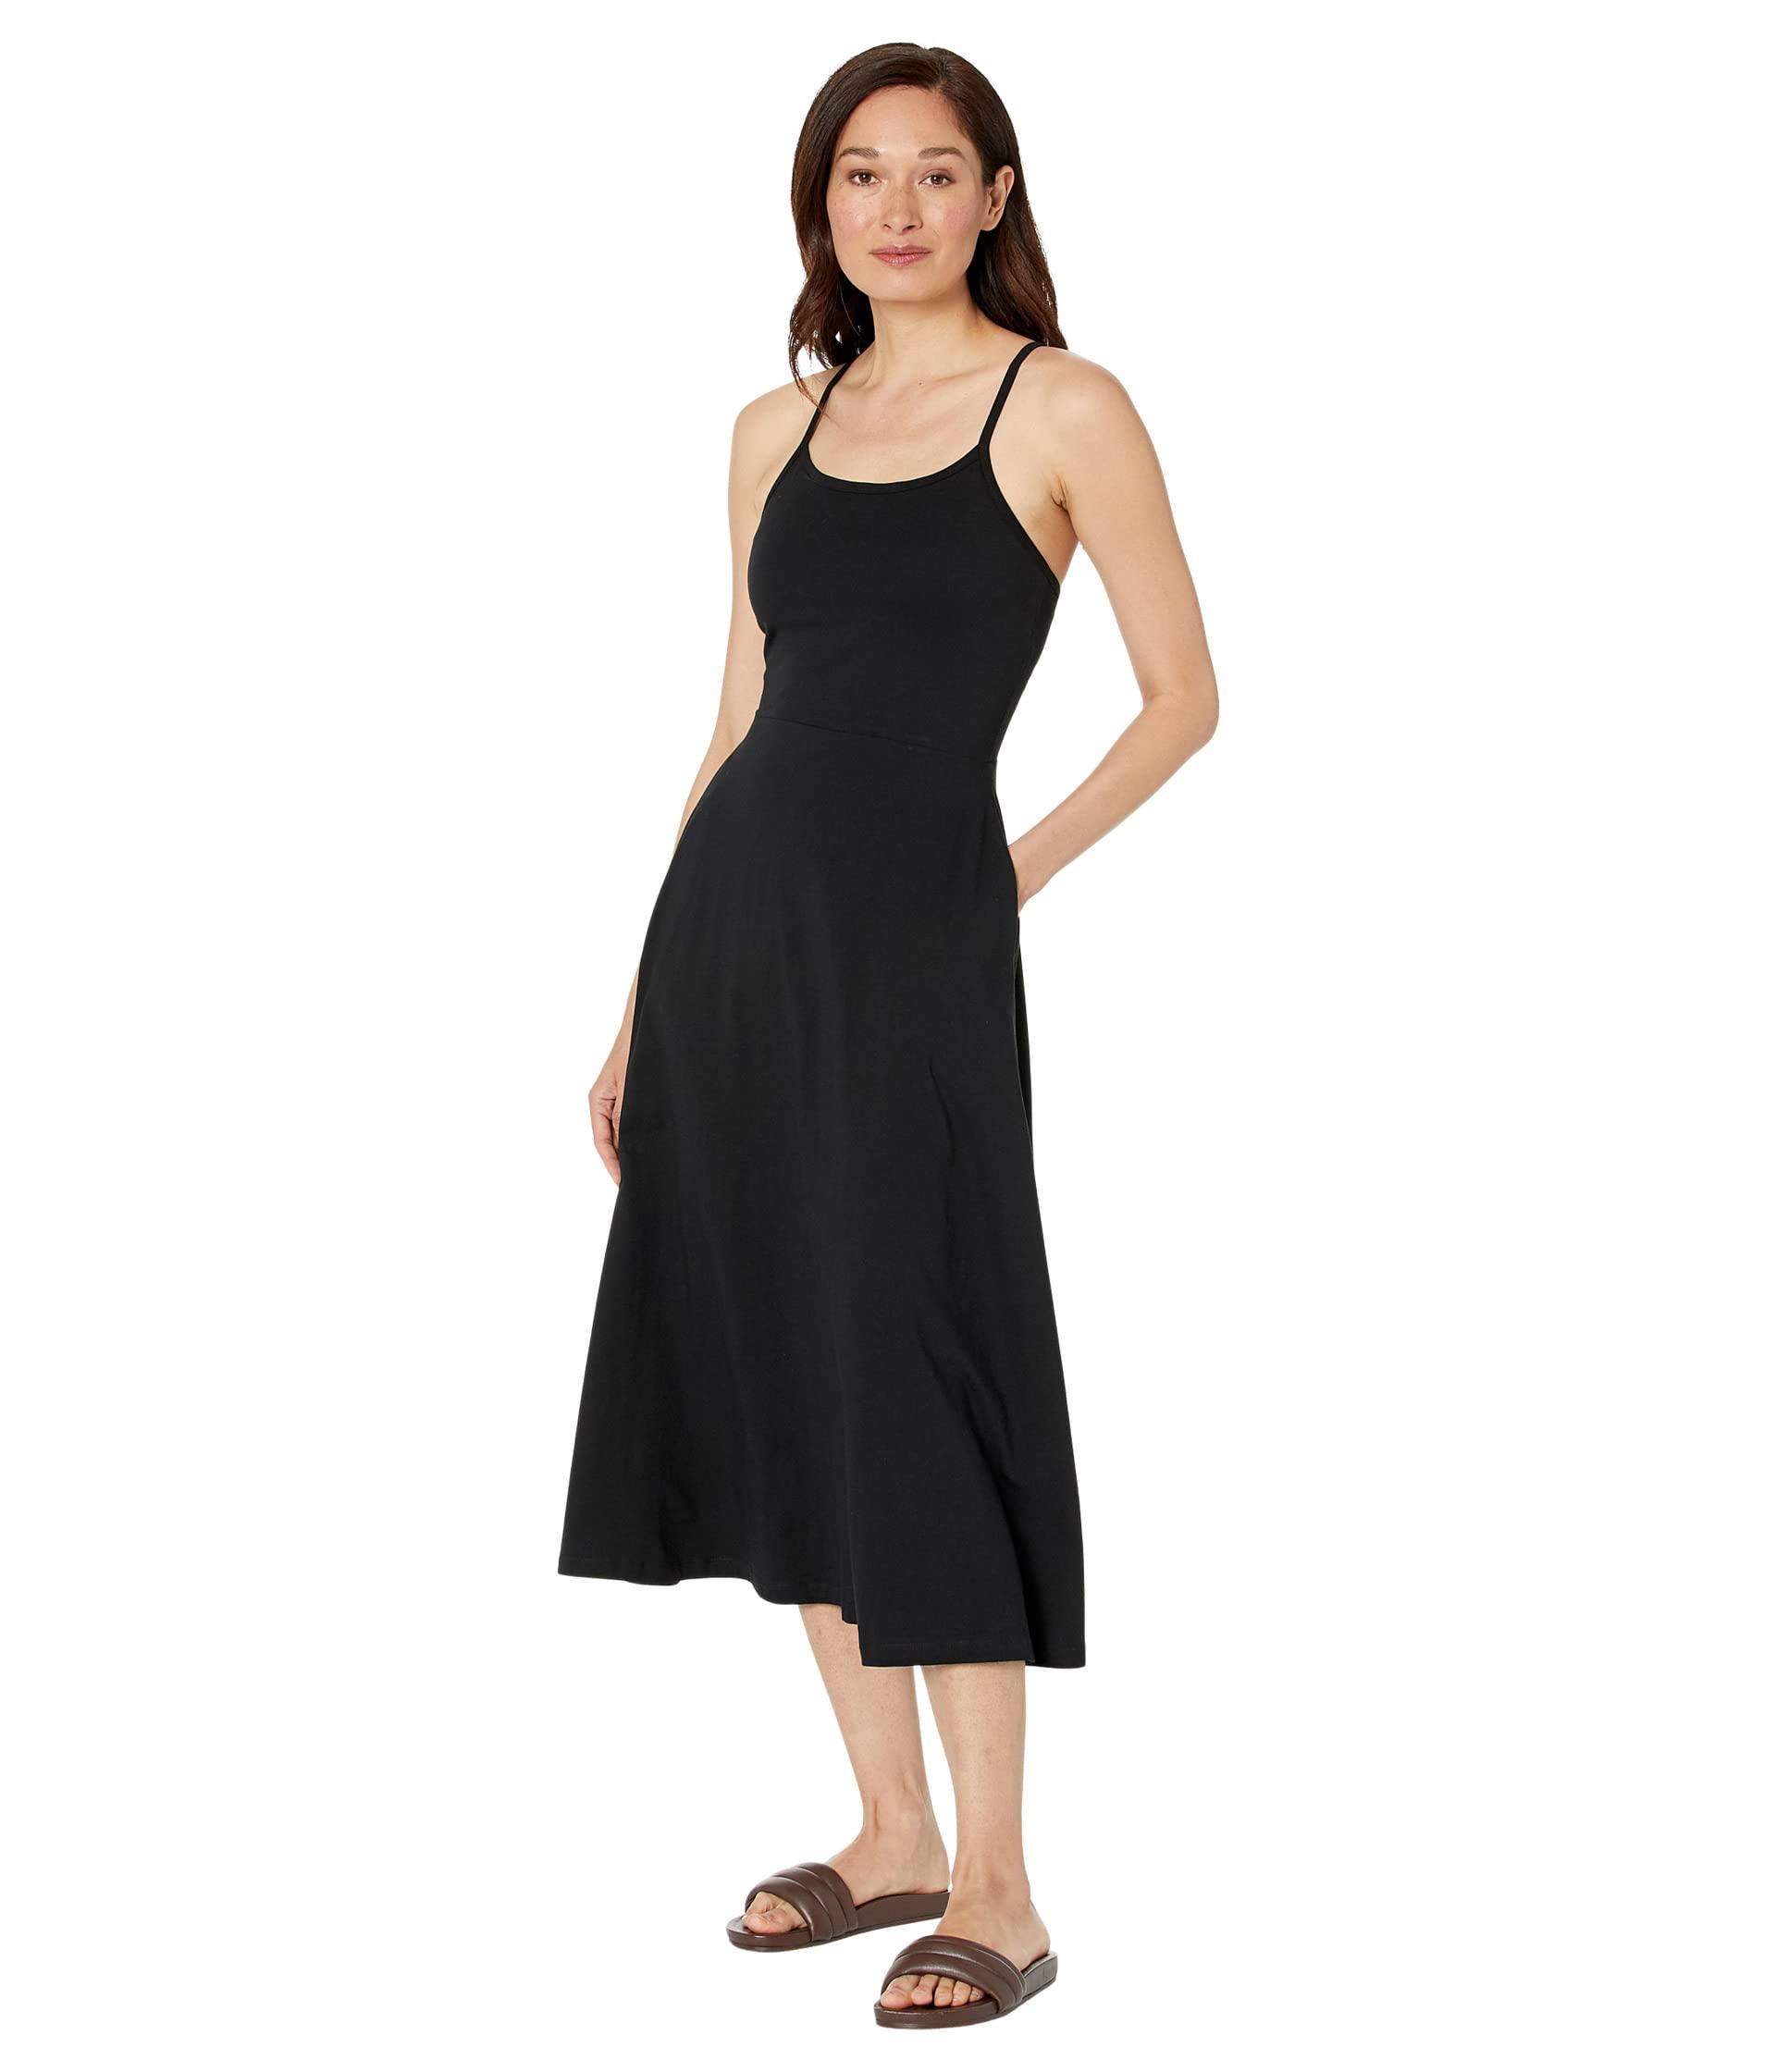 Pact Organic Cotton Fit-and-flare Midi Dress in Black | Lyst